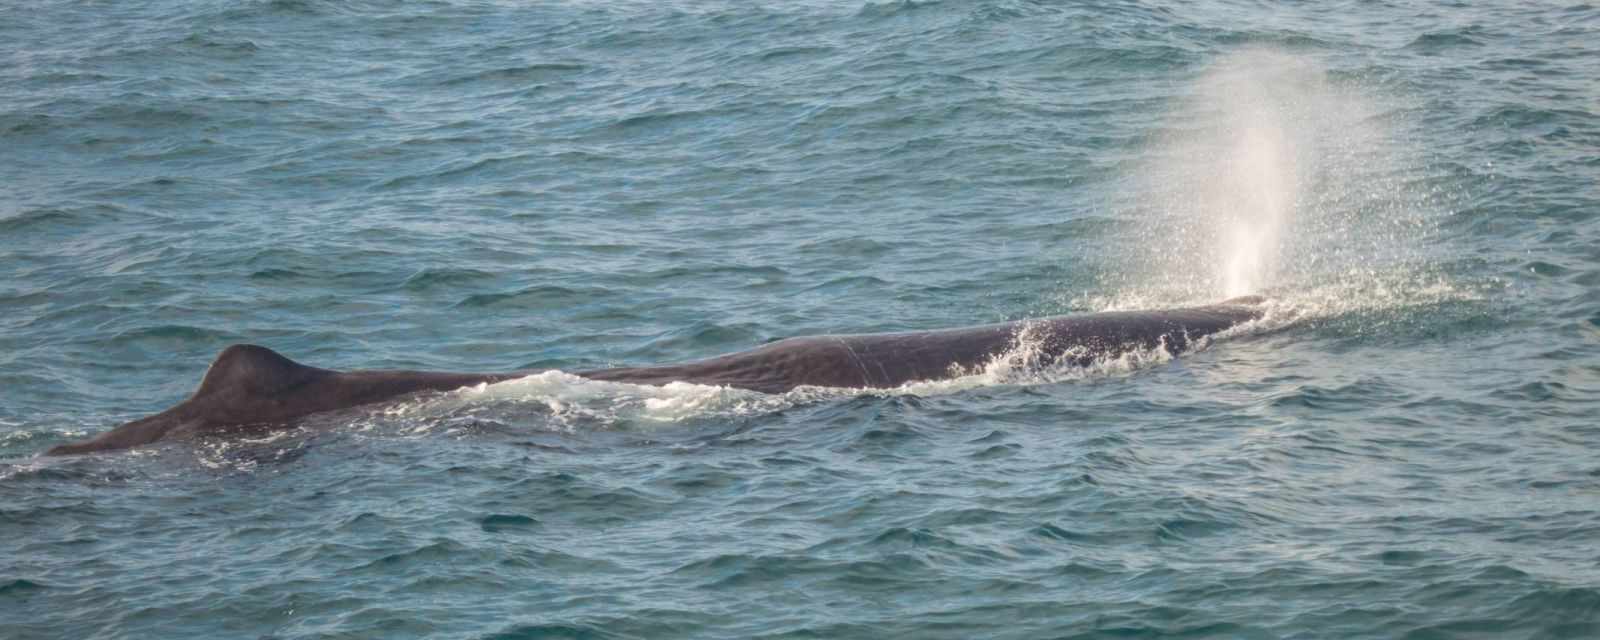 Whale and Dolphin Watching Seasons for Kaikoura